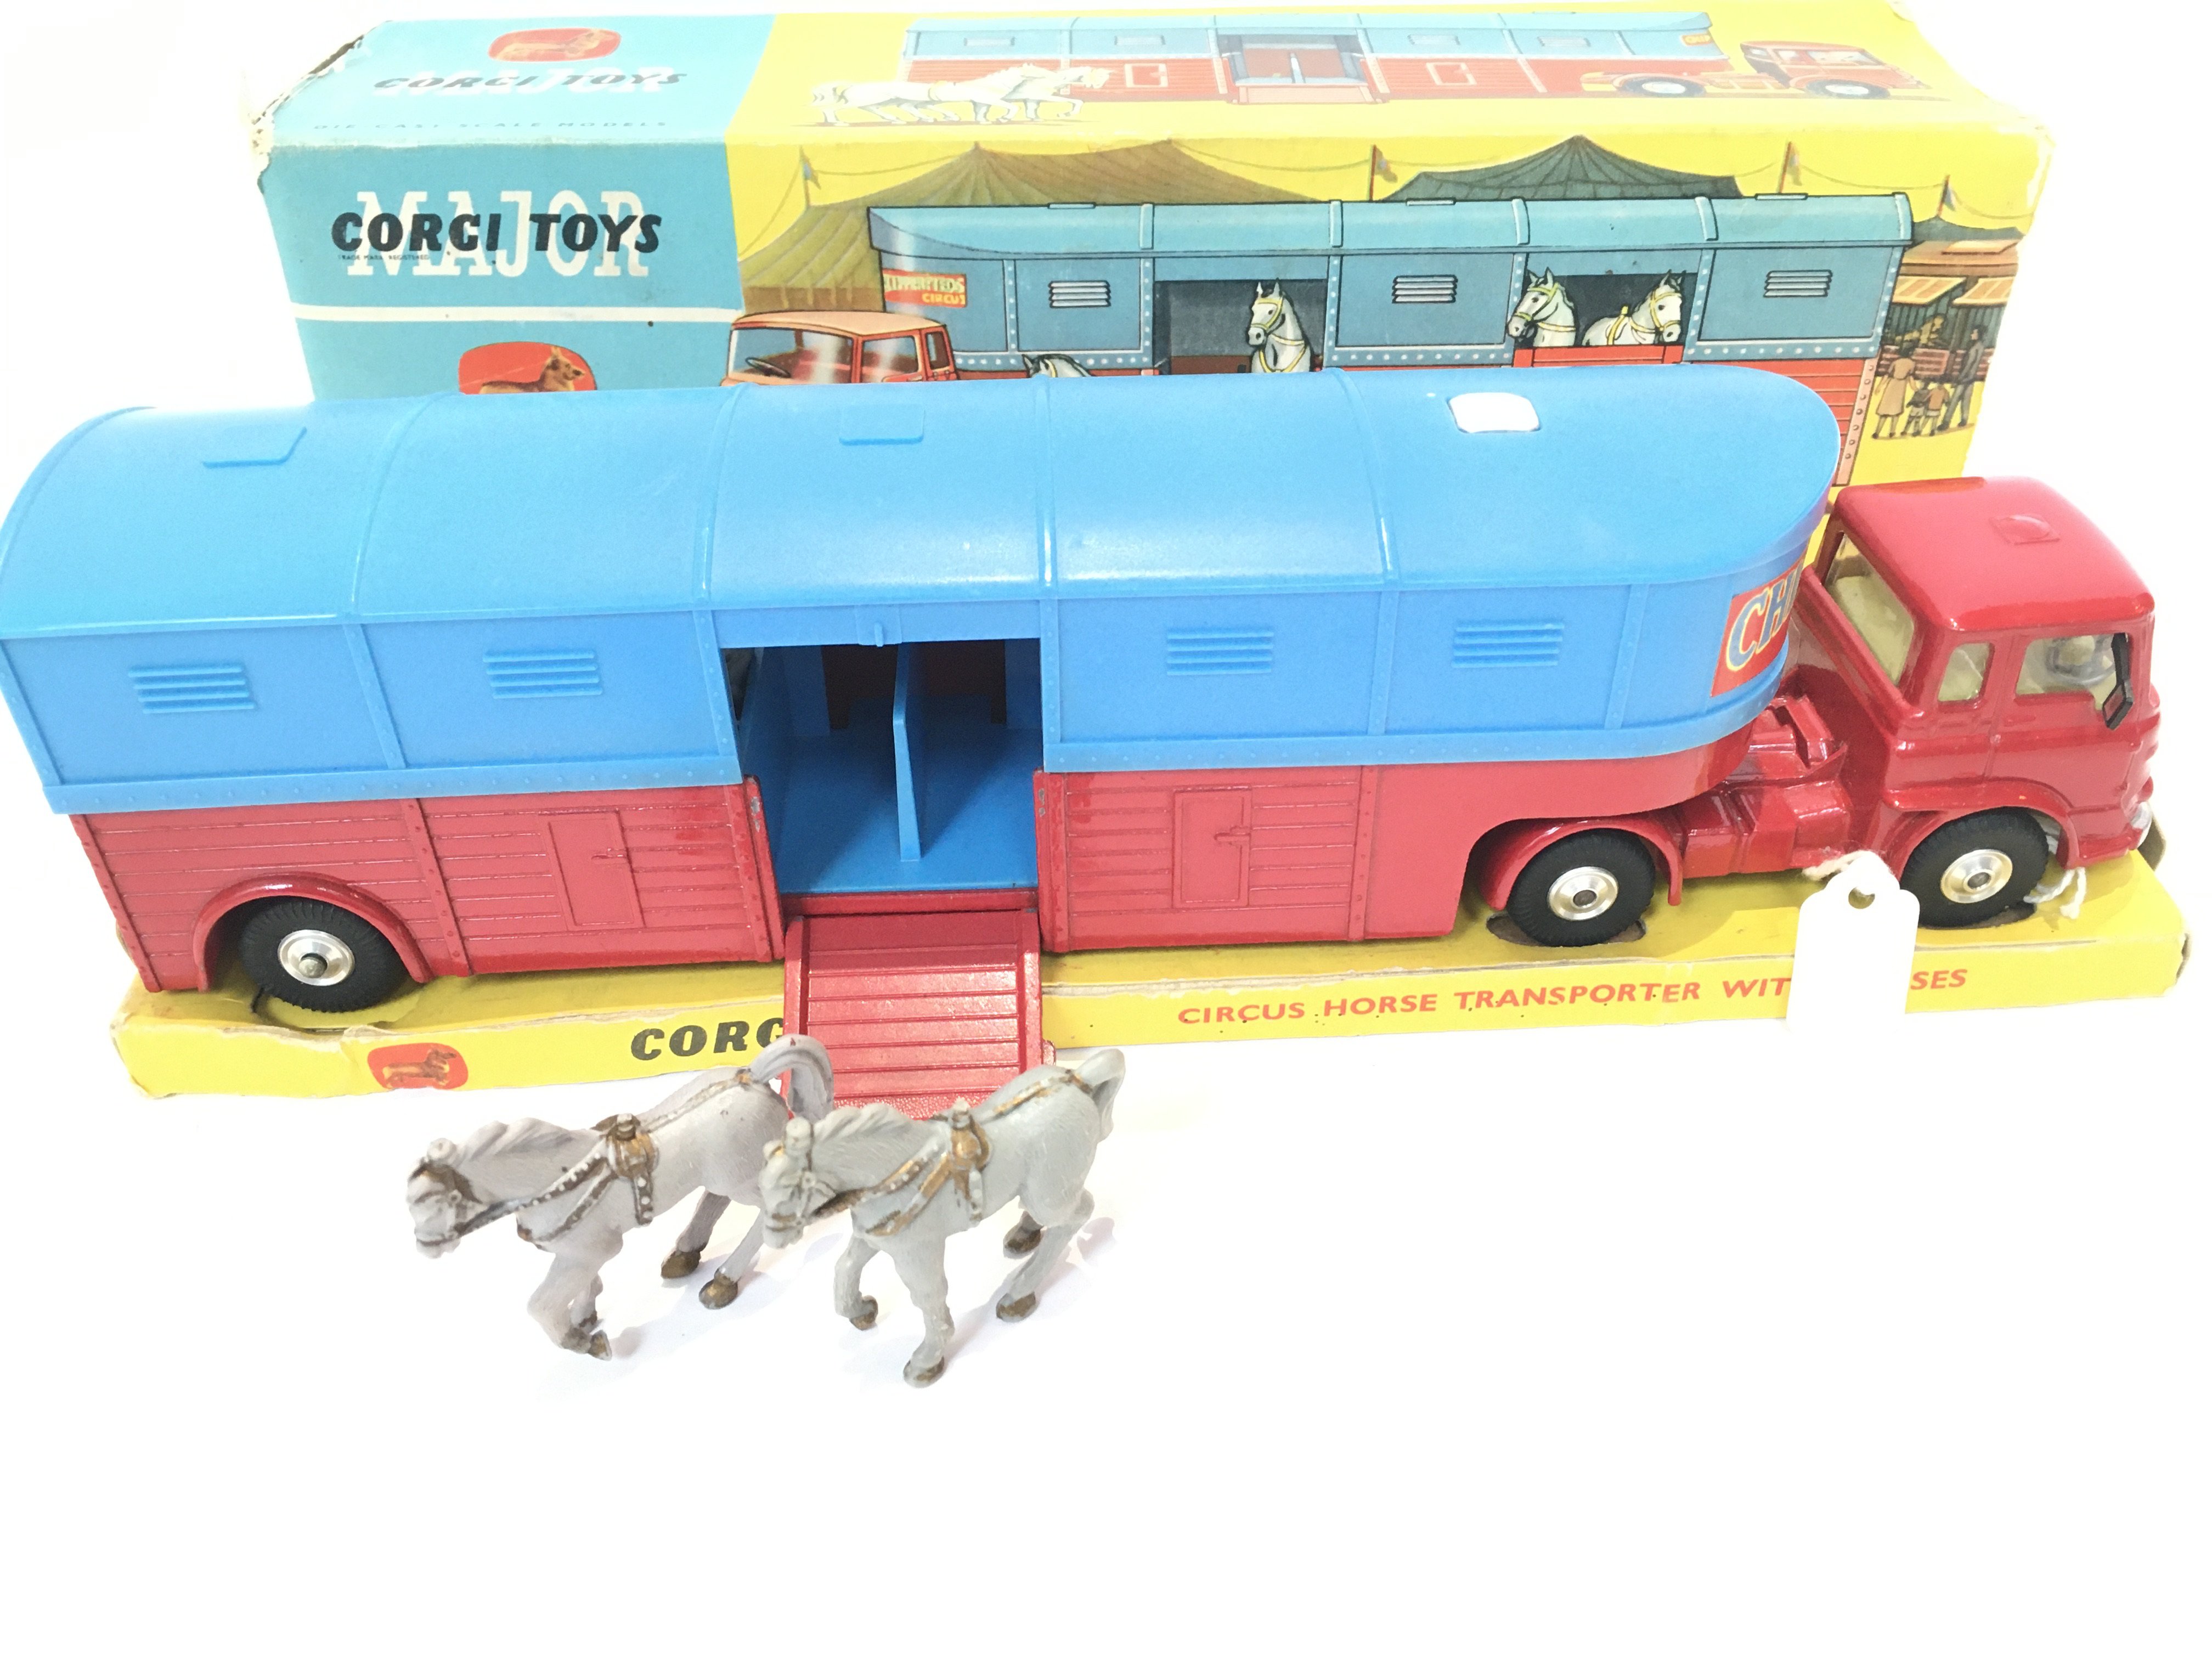 A Boxed Corgi Circus Horse Transporter With Horses - Image 3 of 4